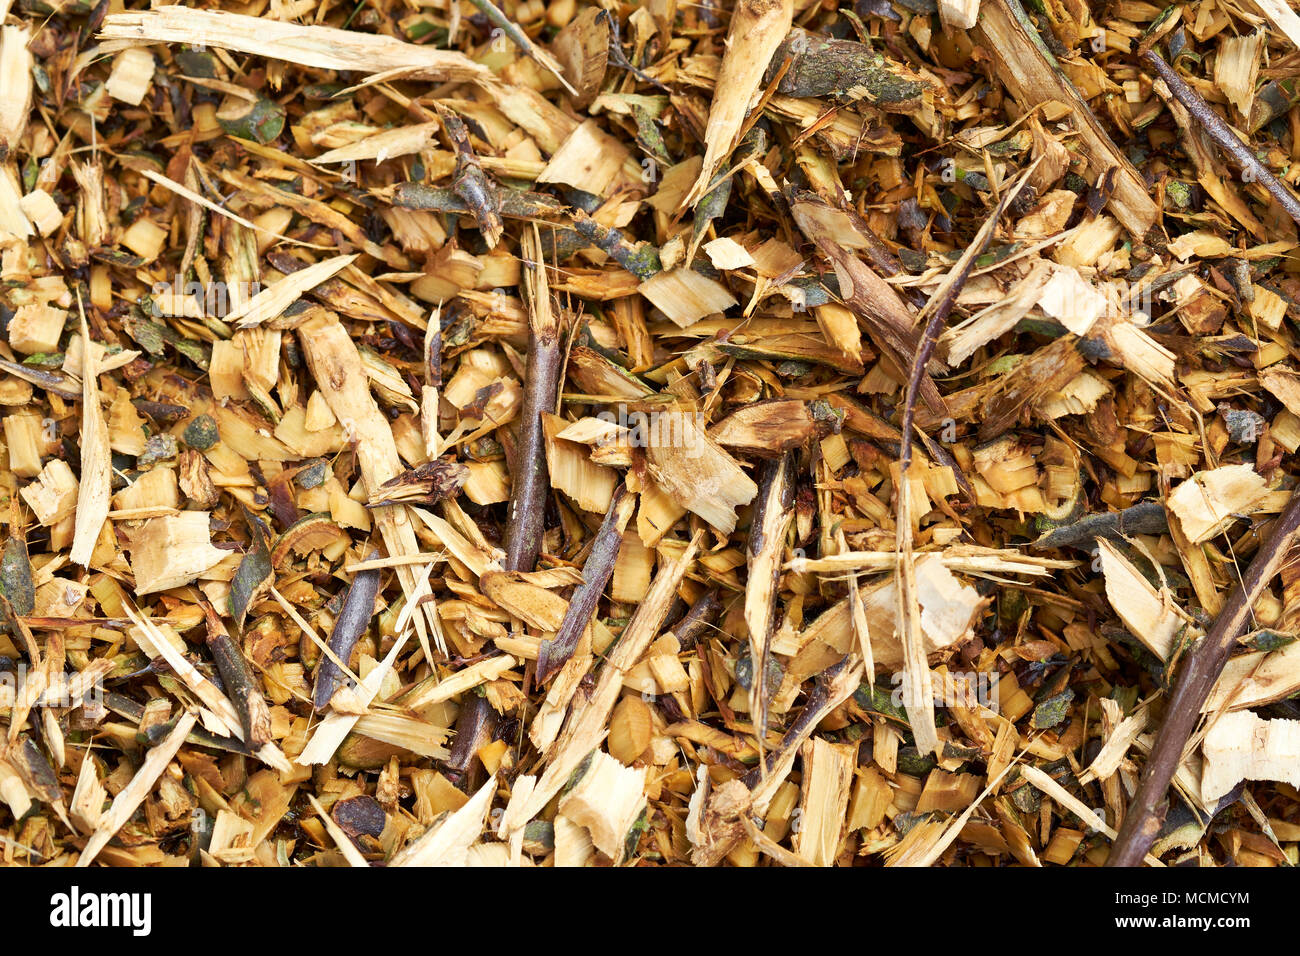 Garden mulch produced by shredding waste woody plant prunings, UK. Stock Photo